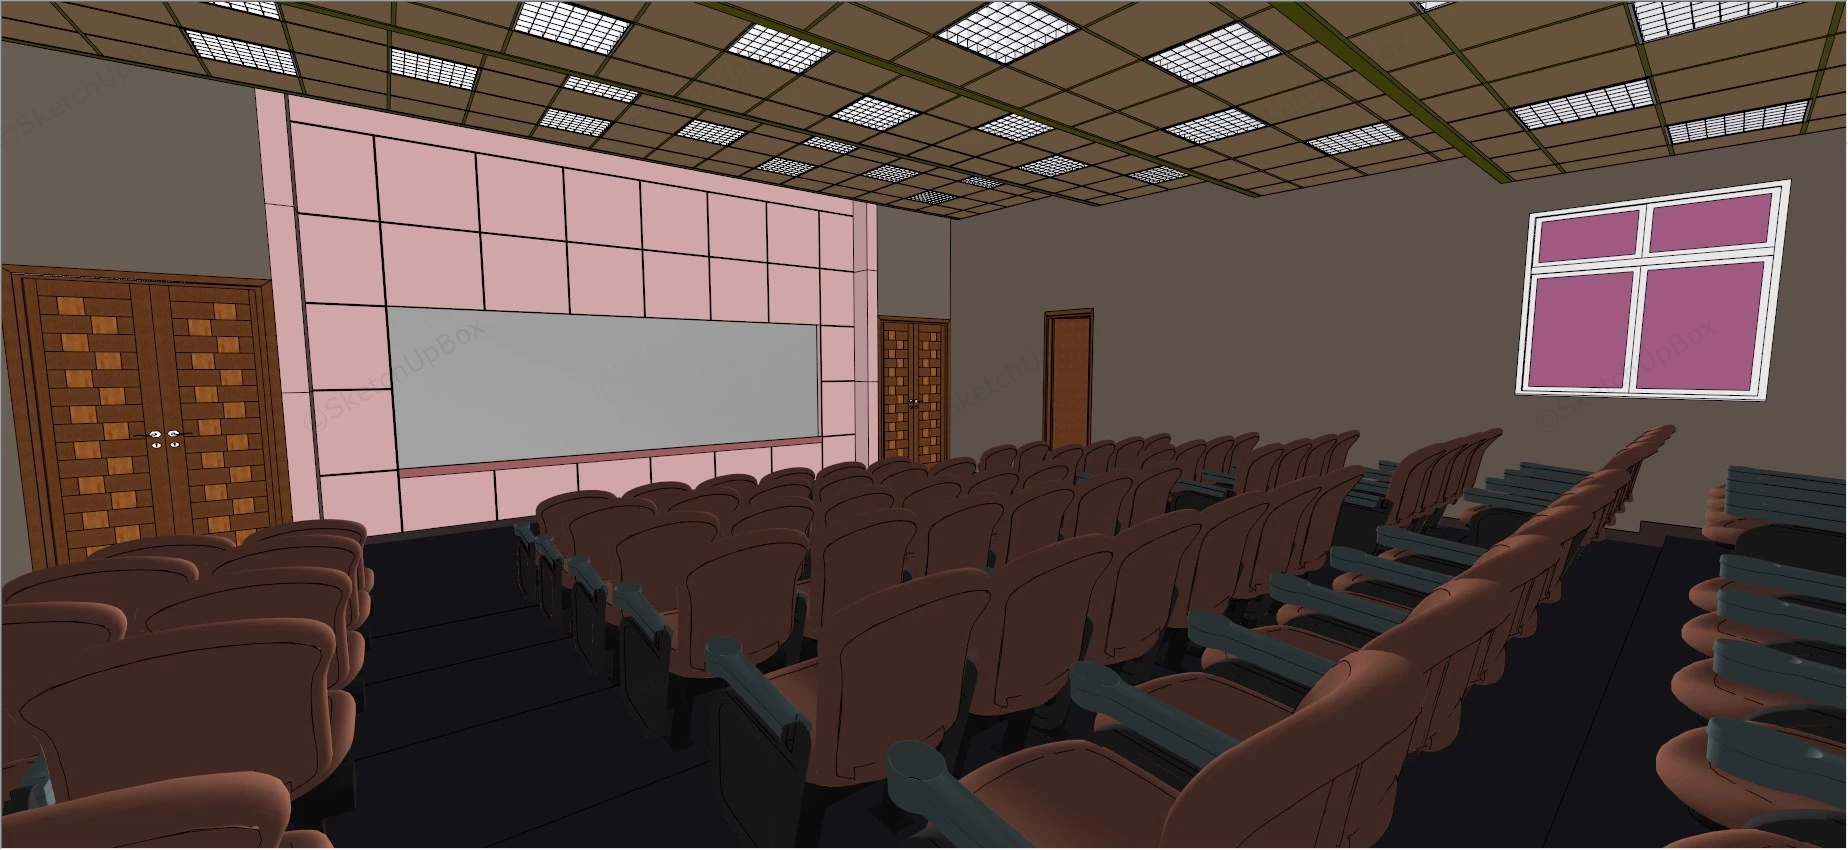 Lecture Theatre Design sketchup model preview - SketchupBox